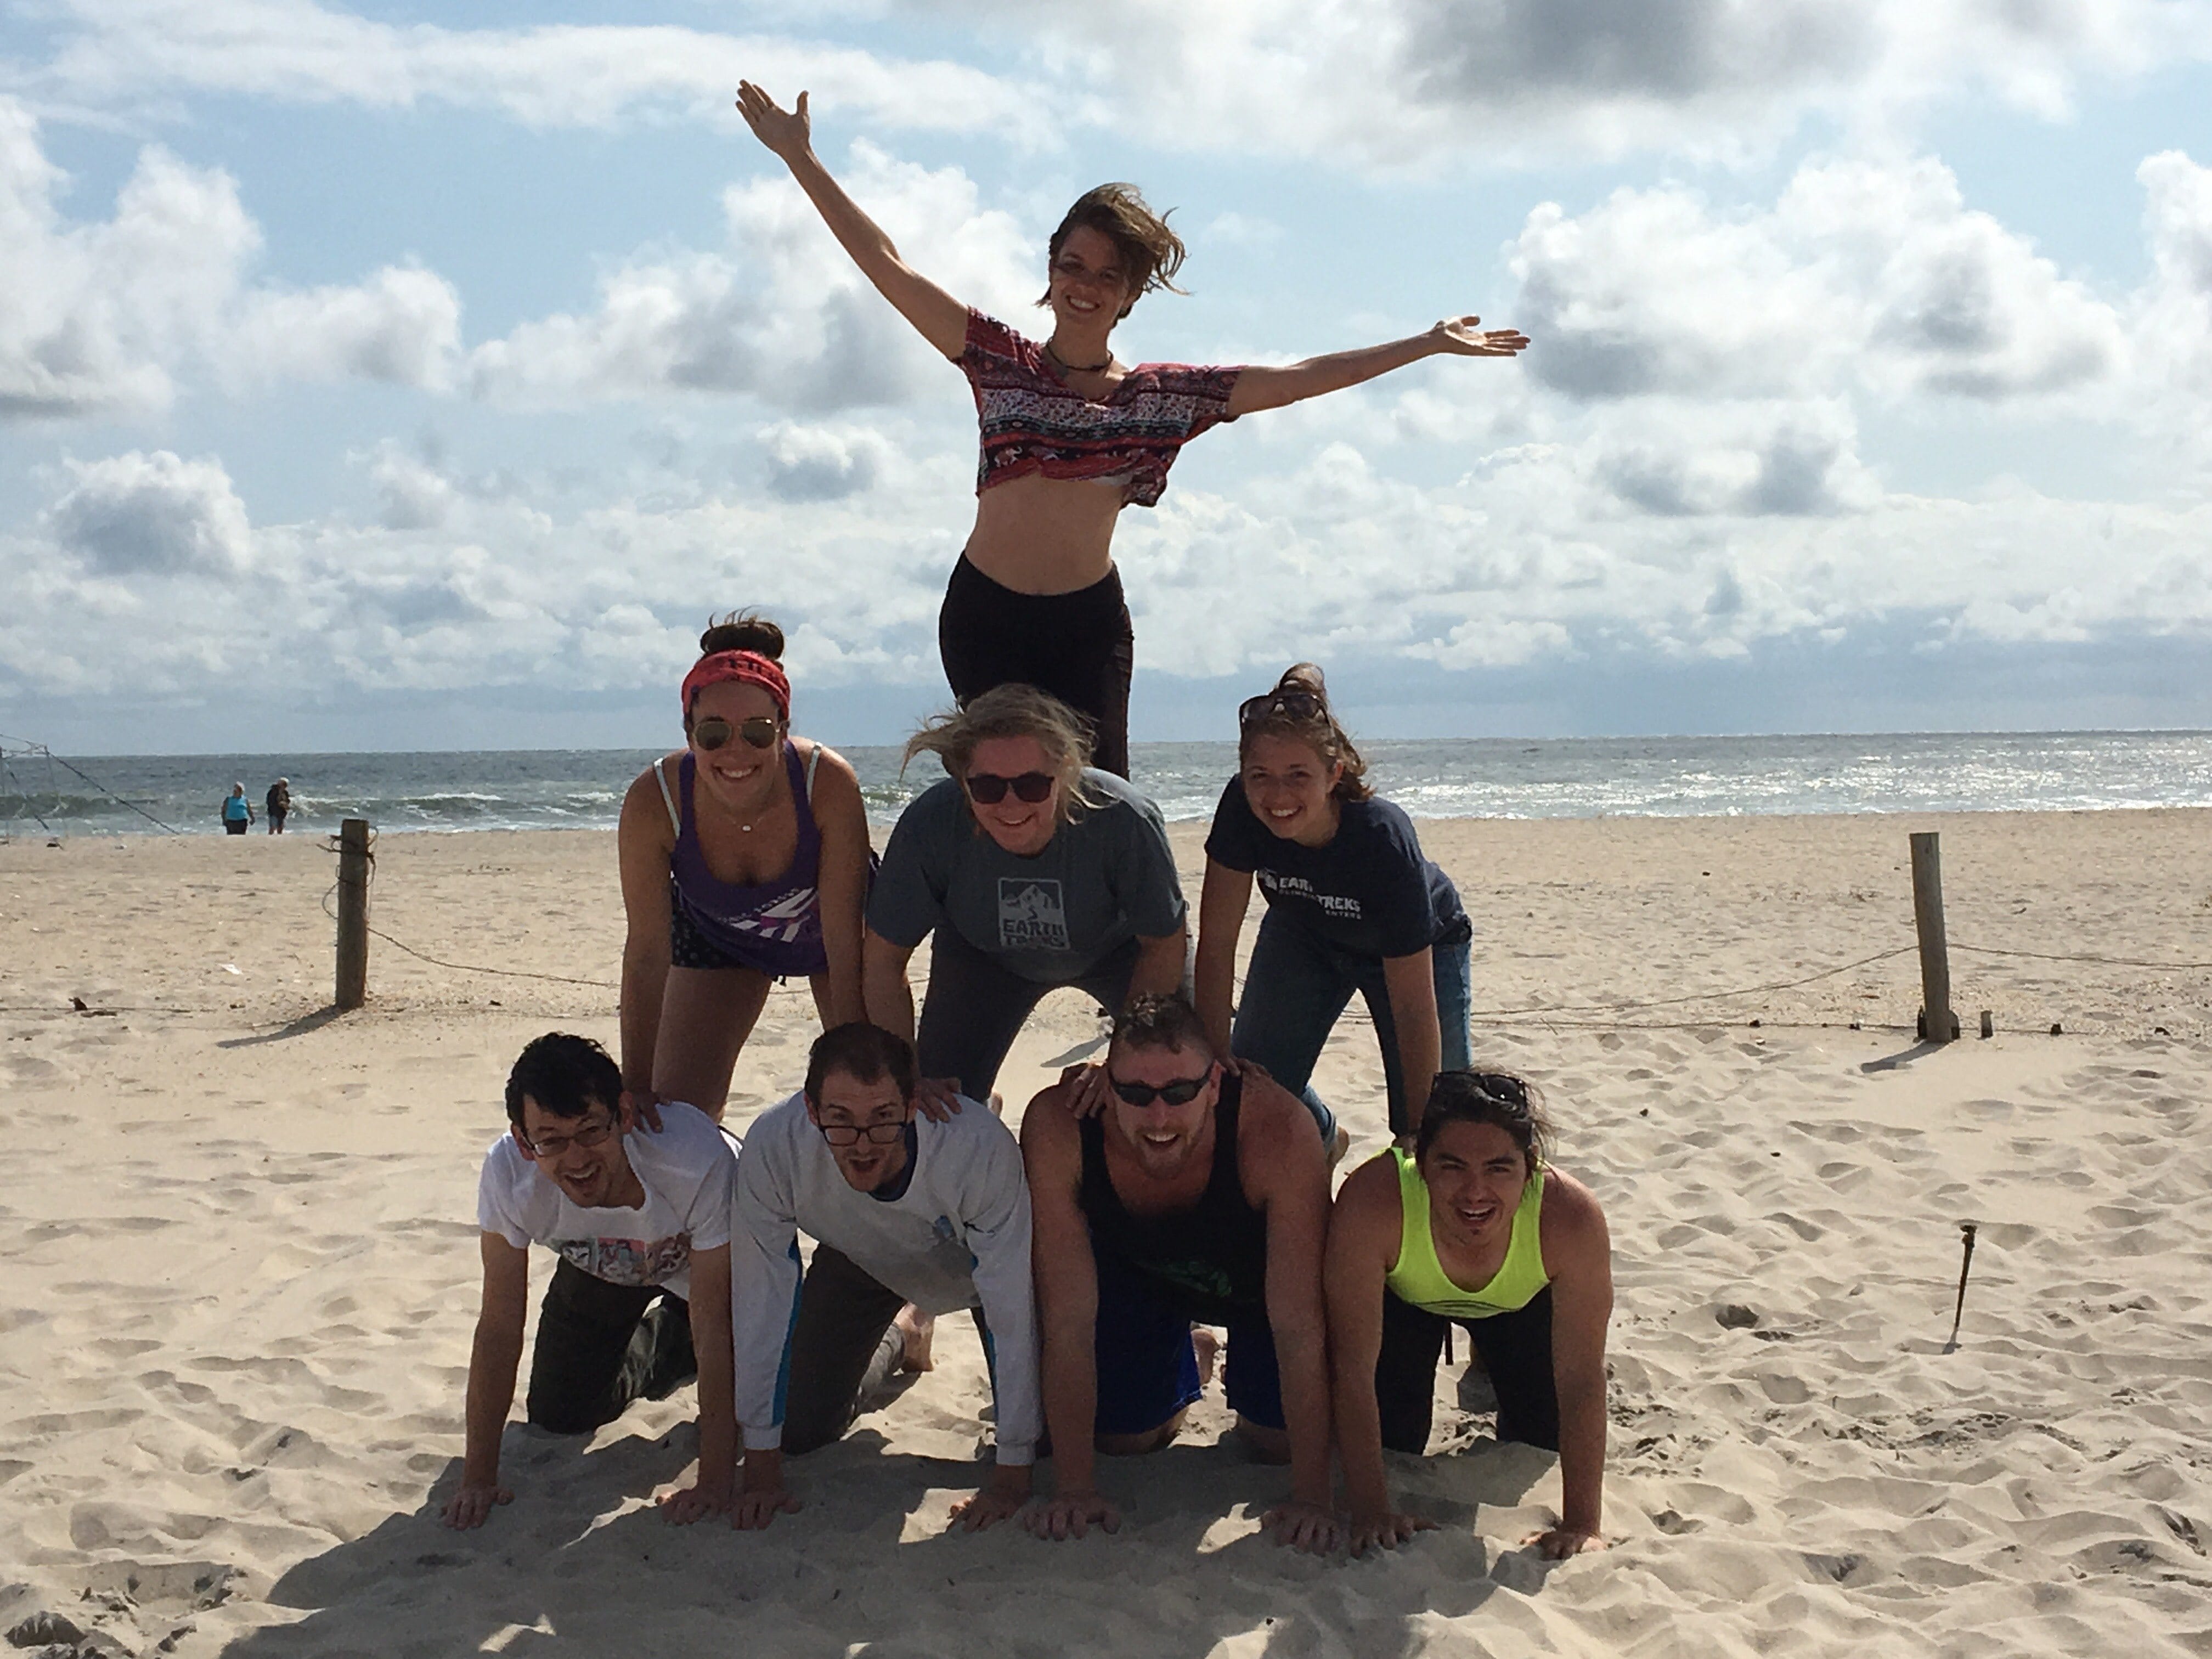 Human pyramid with eight people on a beach